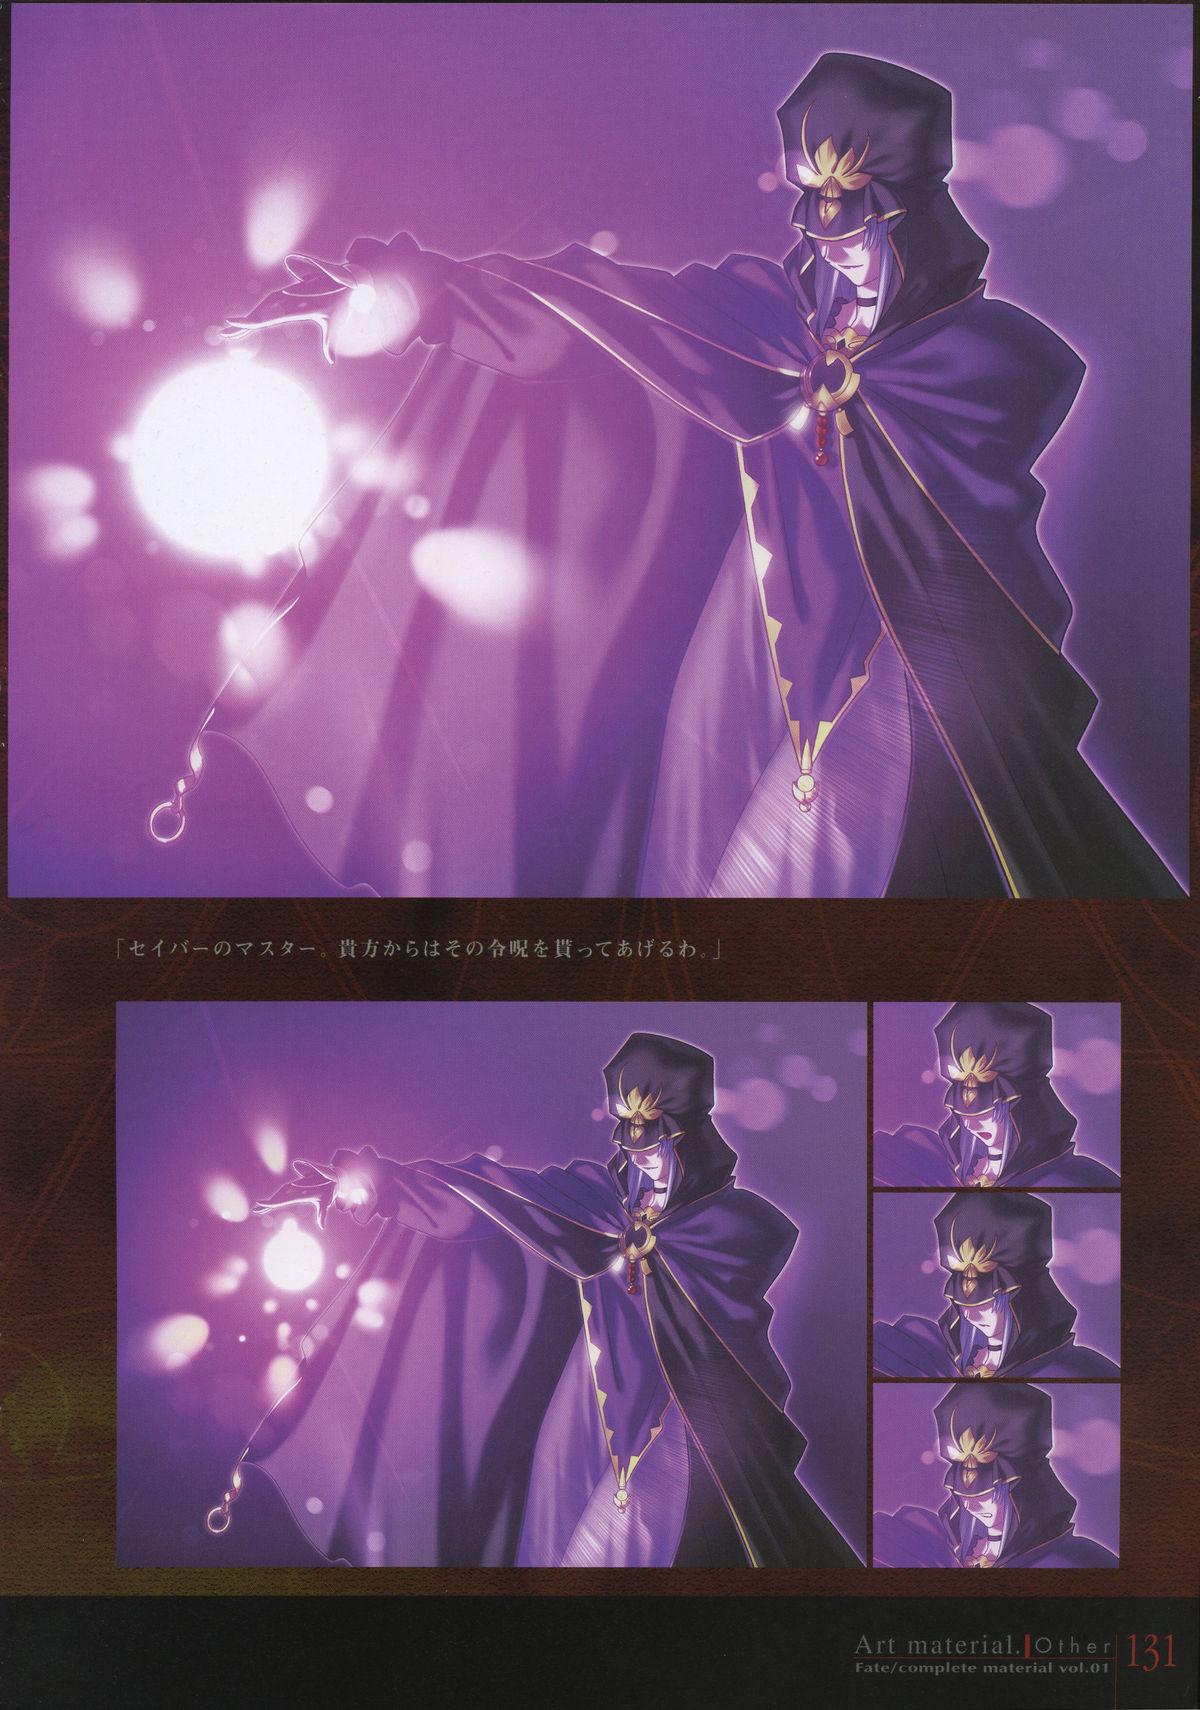 Fate/complete material I - Art material. 135